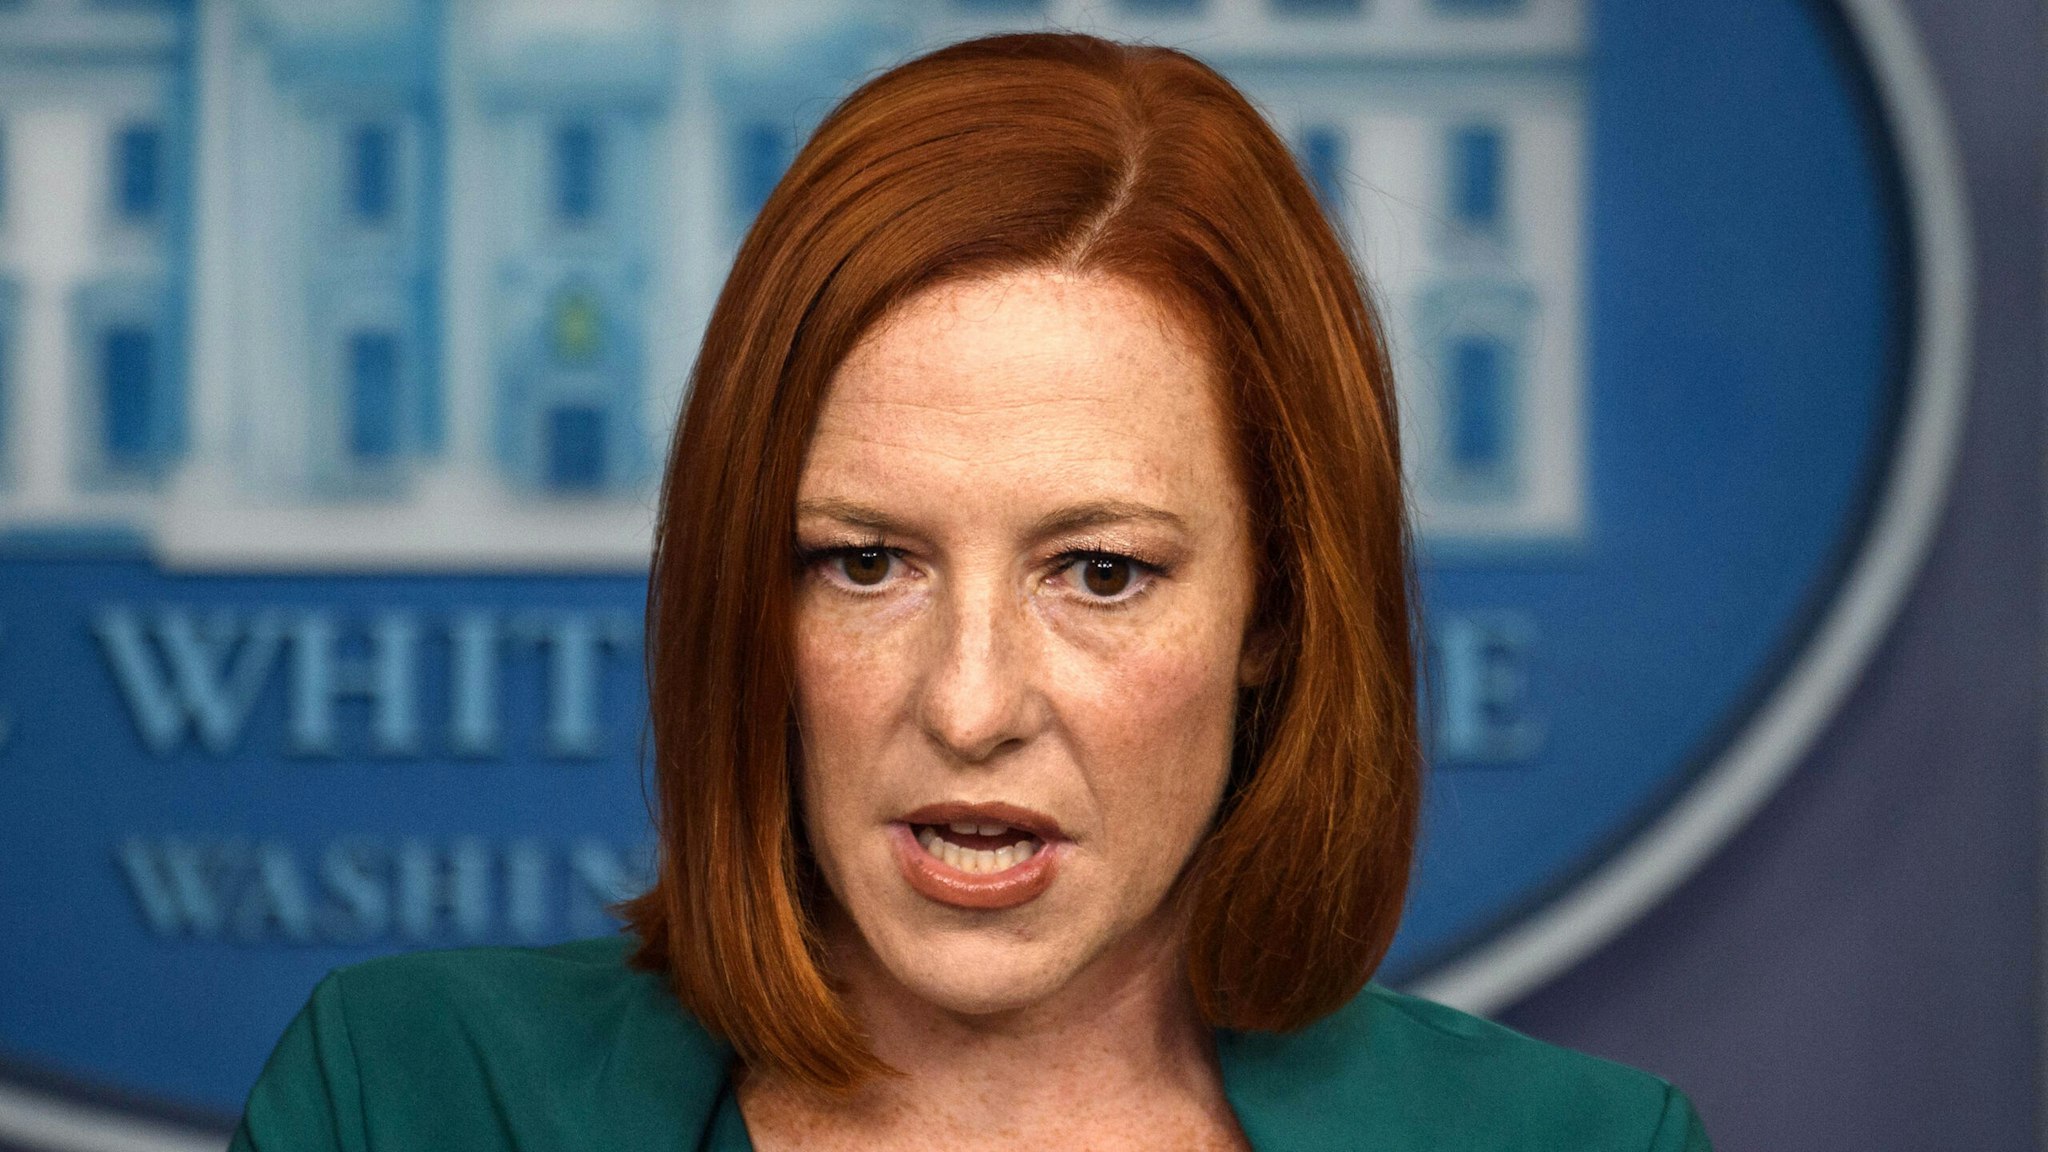 White House Press Secretary Jen Psaki speaks during the daily press briefing at the White House in Washington, DC, on October 6, 2021.